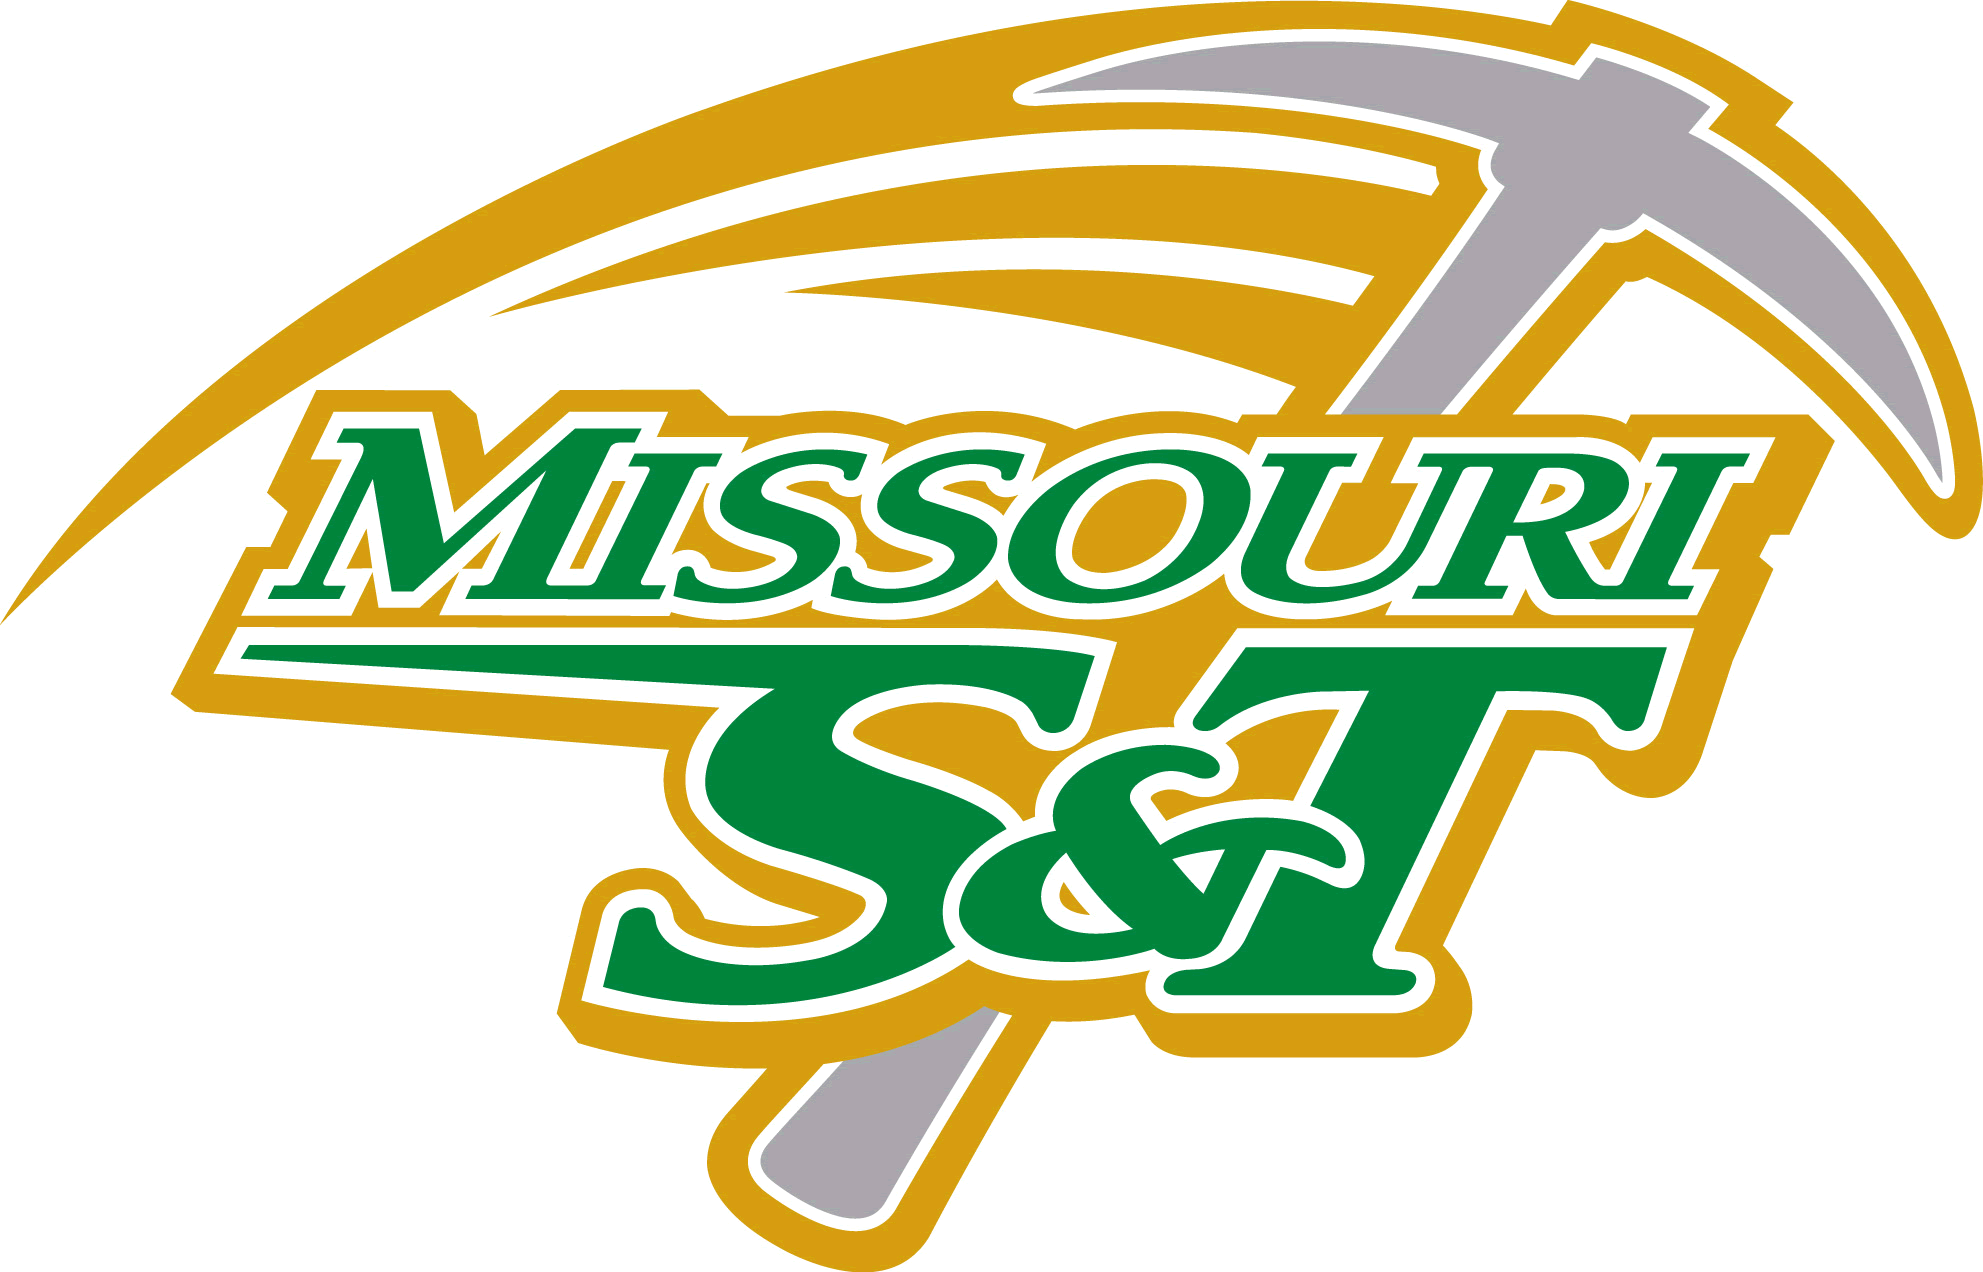 Missouri University of Science and Technology for the Missouri Wolverines Youth Tackle and Flag Football Club in Kansas City Missouri